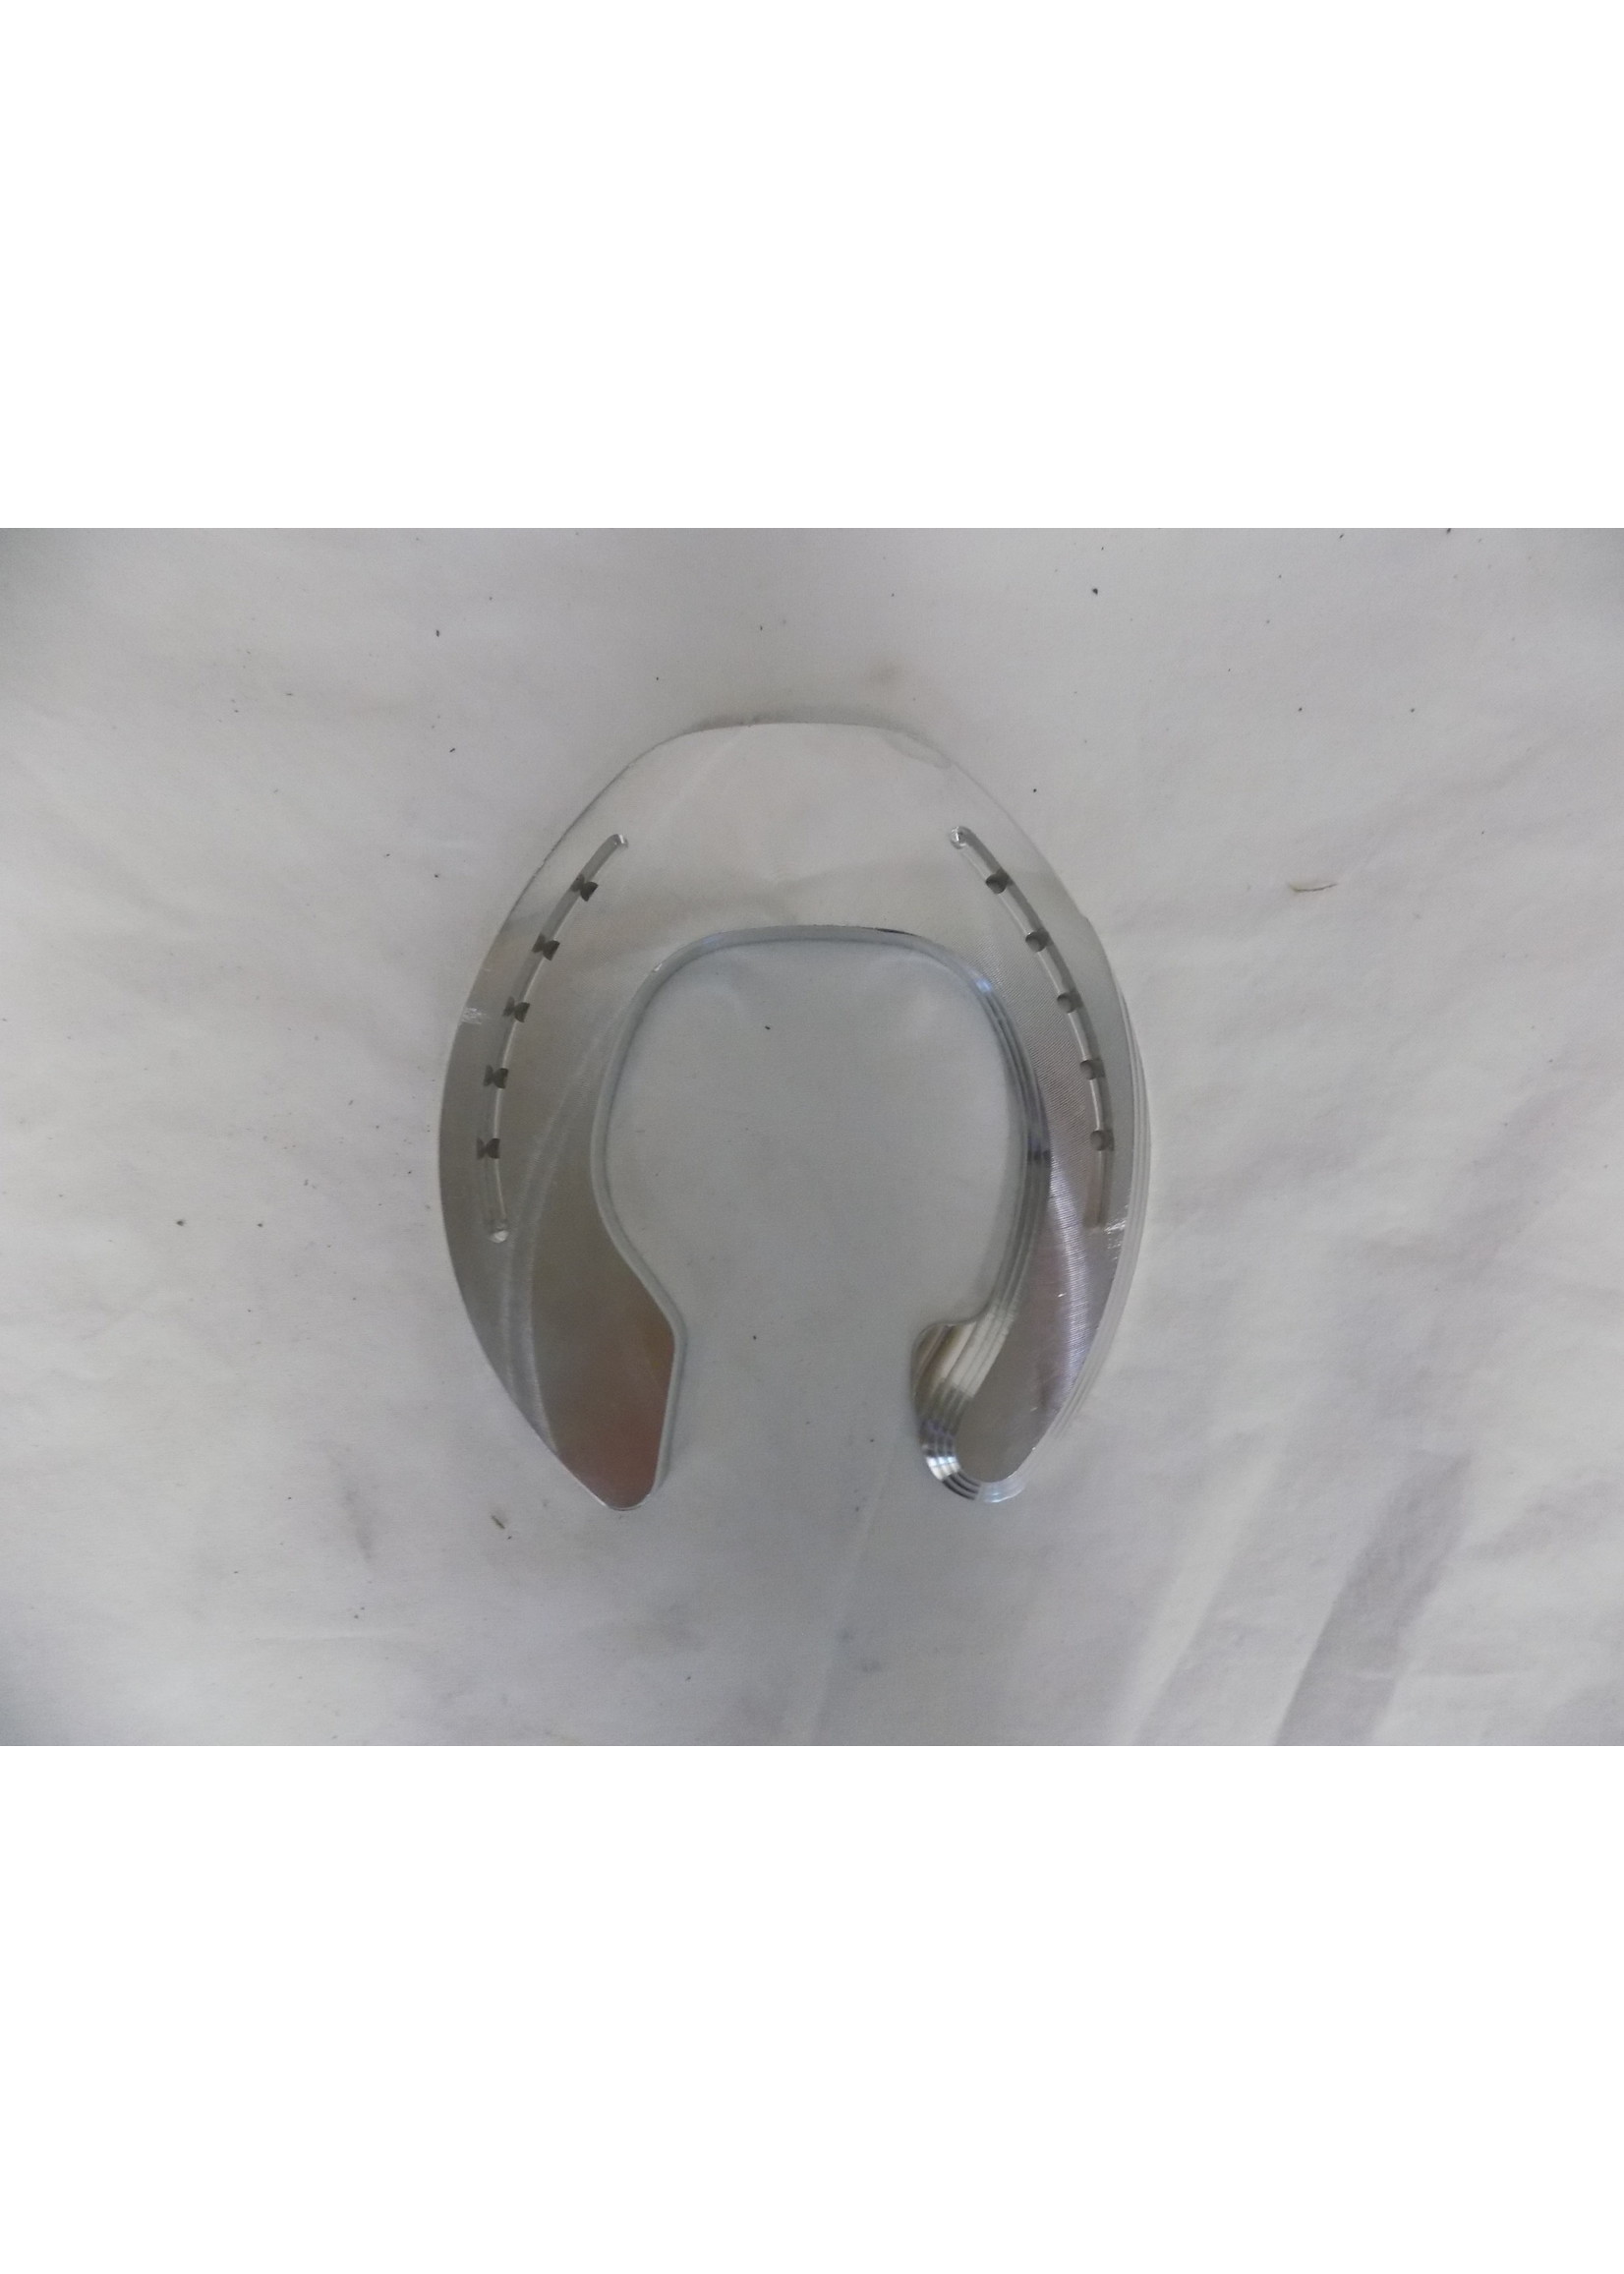 Grand Circuit Suspensory Hind Branch B Size 9 ea